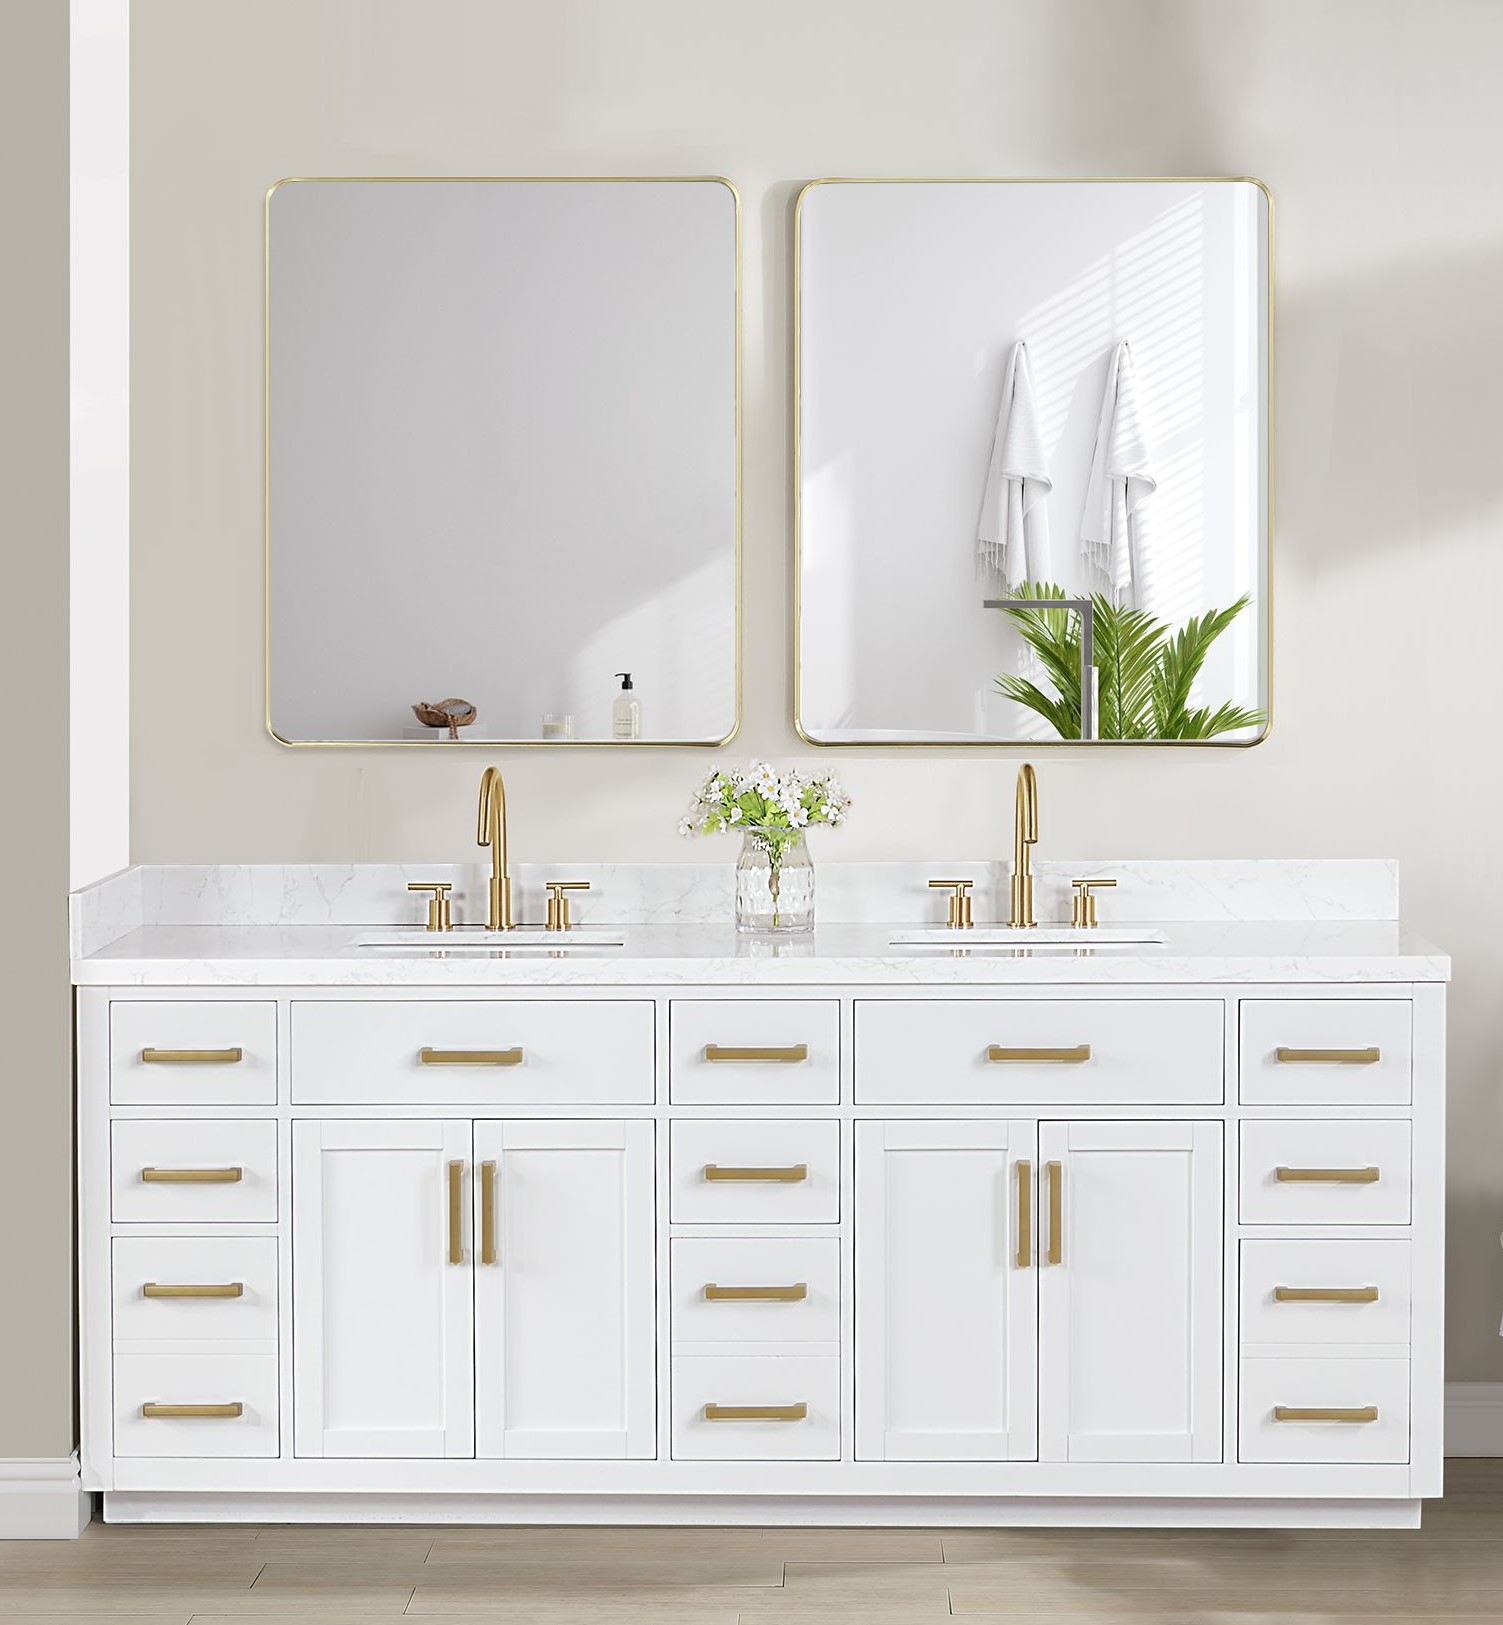 Issac Edwards 84" Double Bathroom Vanity in White with Grain White Composite Stone Countertop with Mirror